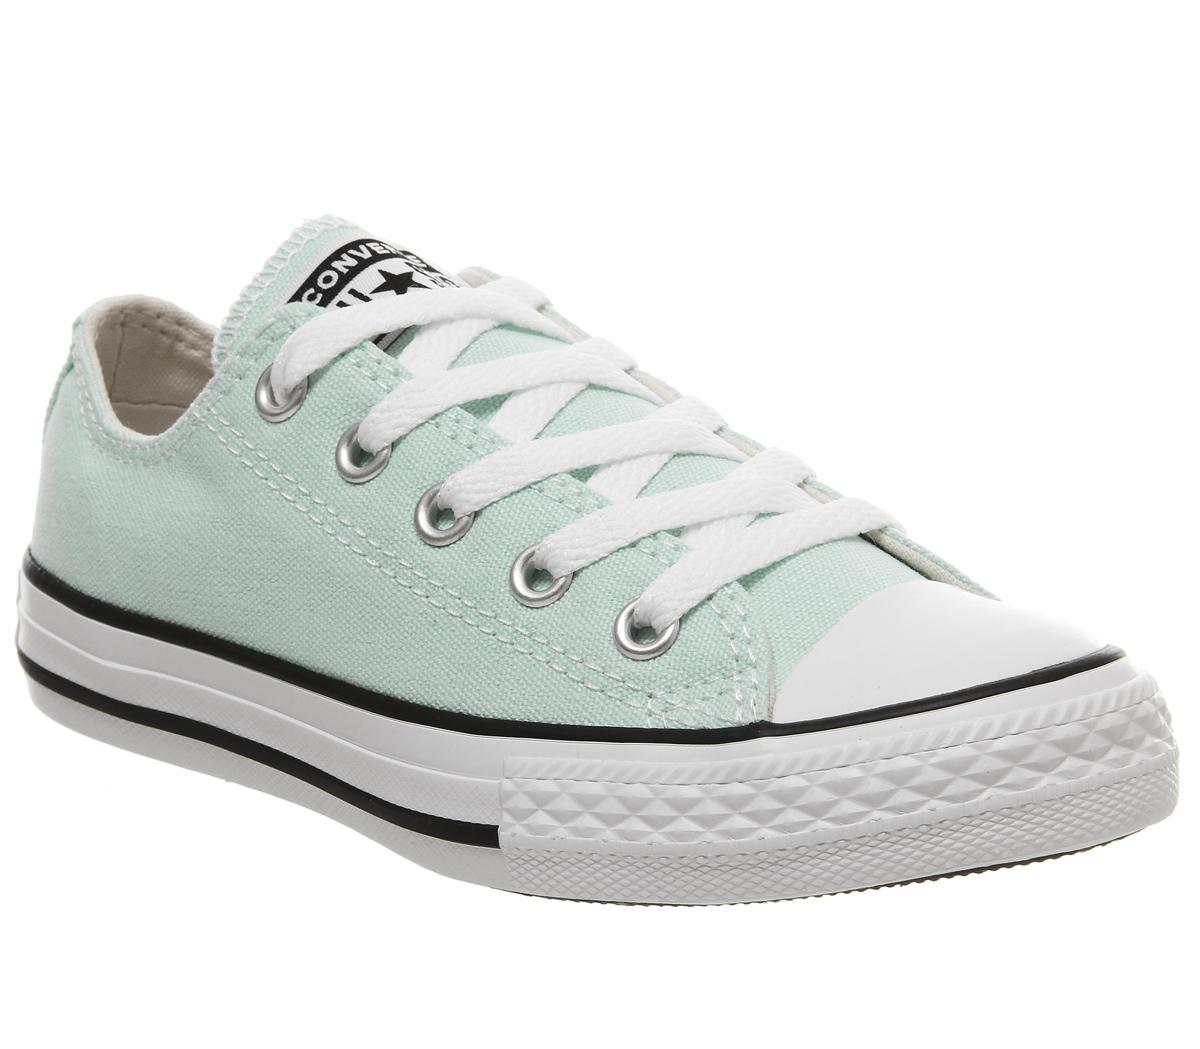 Converse All Star Low Youth Trainers Teal Tint White - Unisex